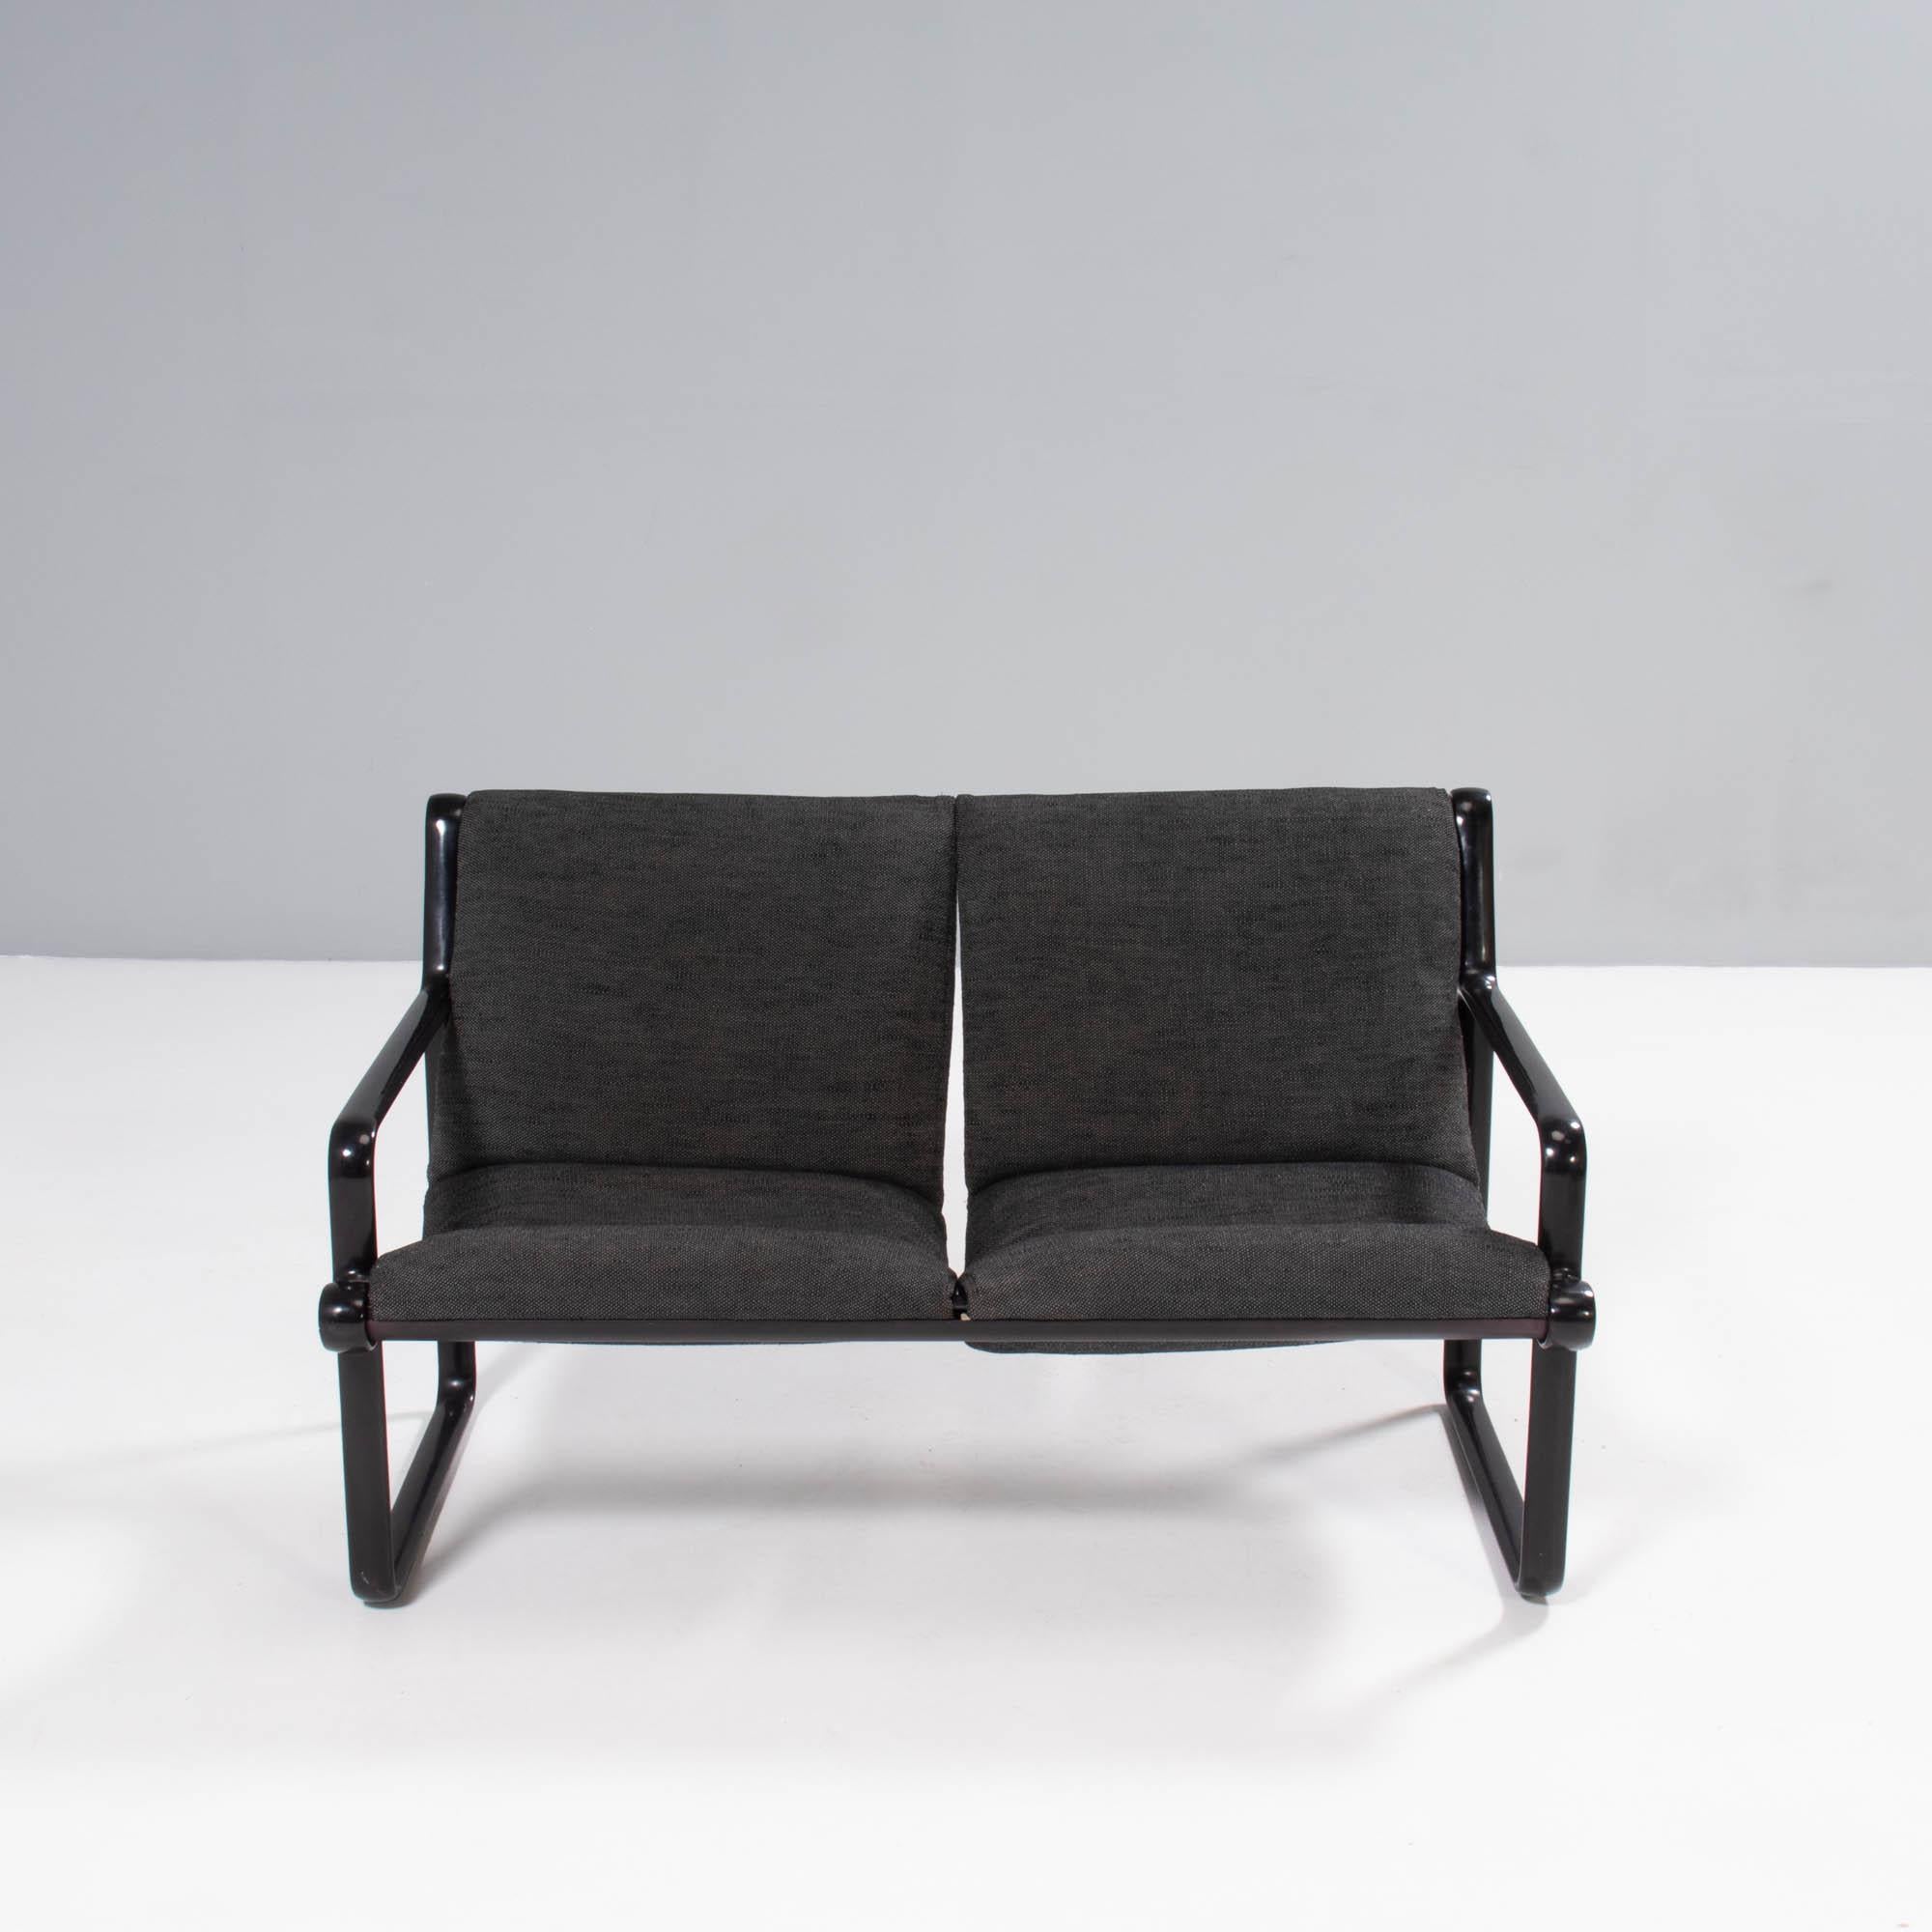 Designed by Bruce Hannah and Andrew Ivar Morrison for Knoll, this Sling sofa is a fantastic example of 1970s design.

Inspired by sail boats, the Sling sofa features an industrial style metal frame with armrests in a black finish.

The two seats